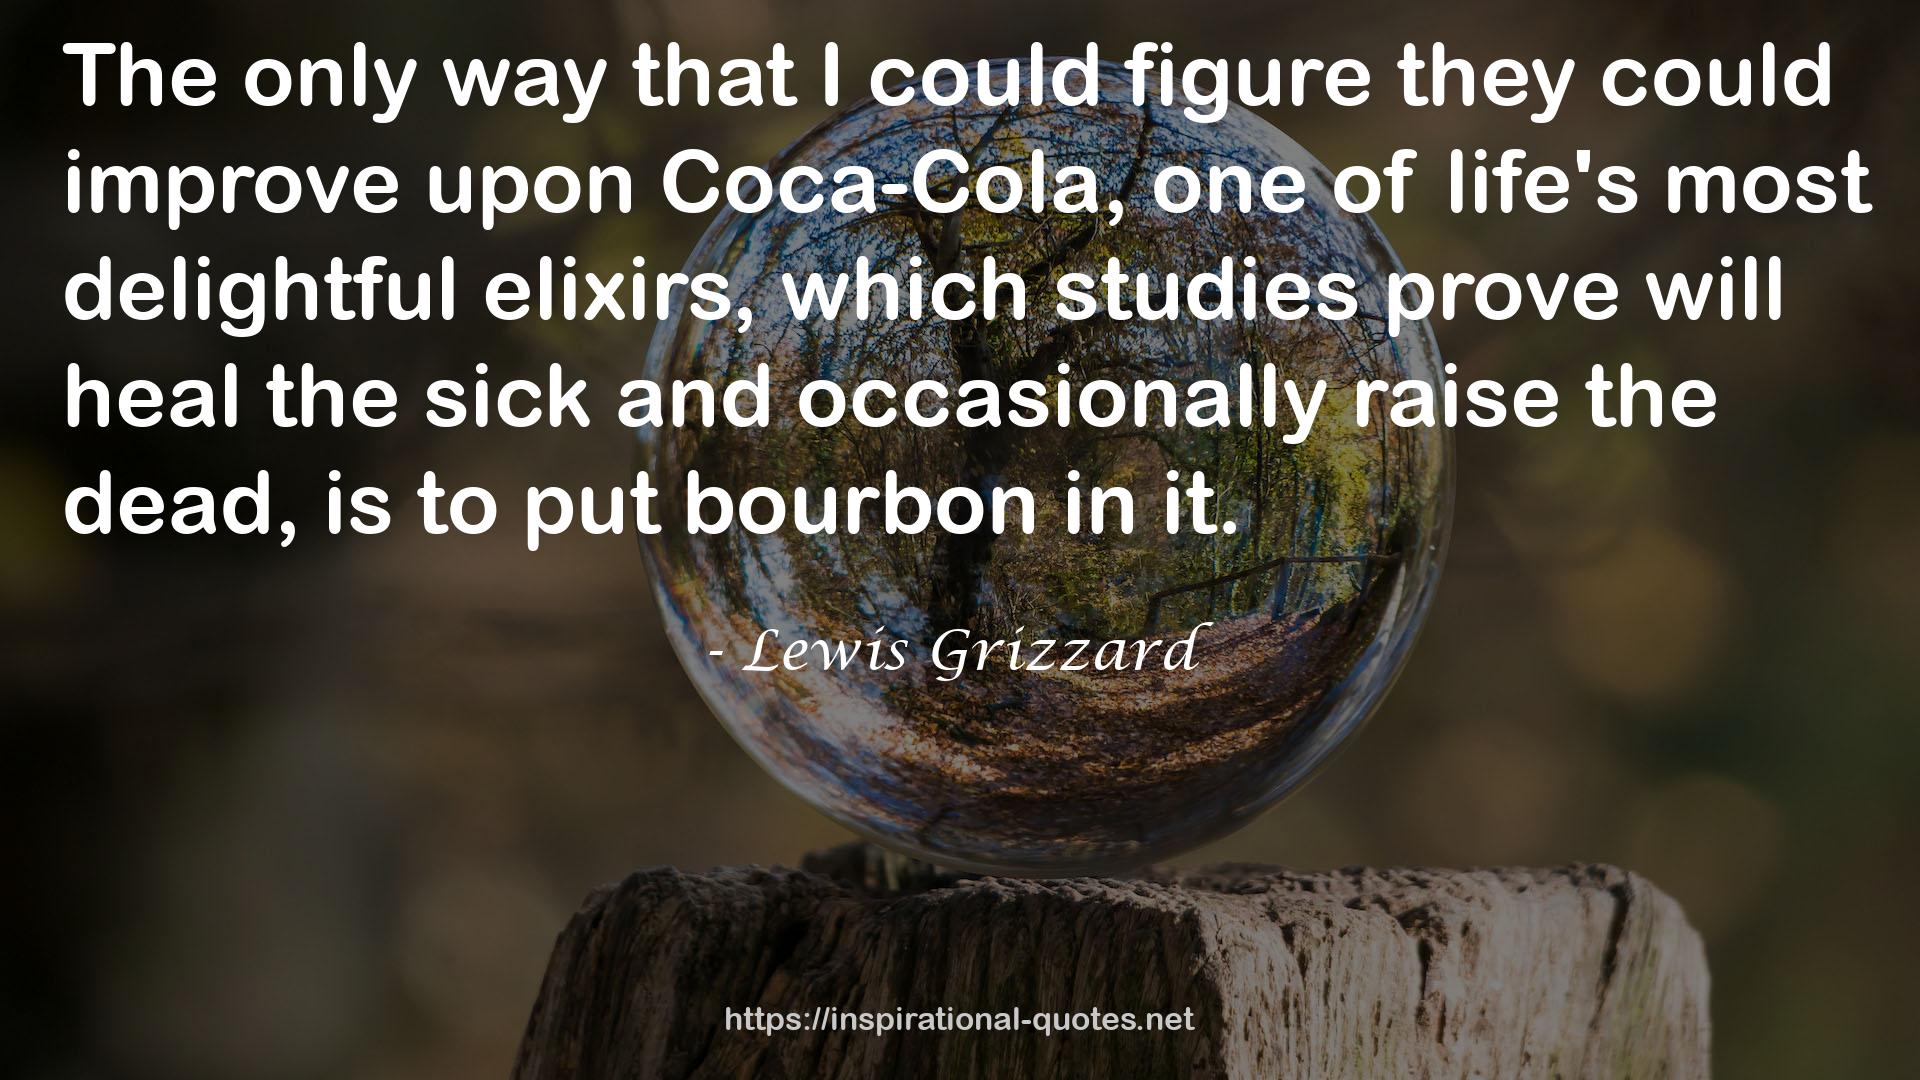 Lewis Grizzard QUOTES